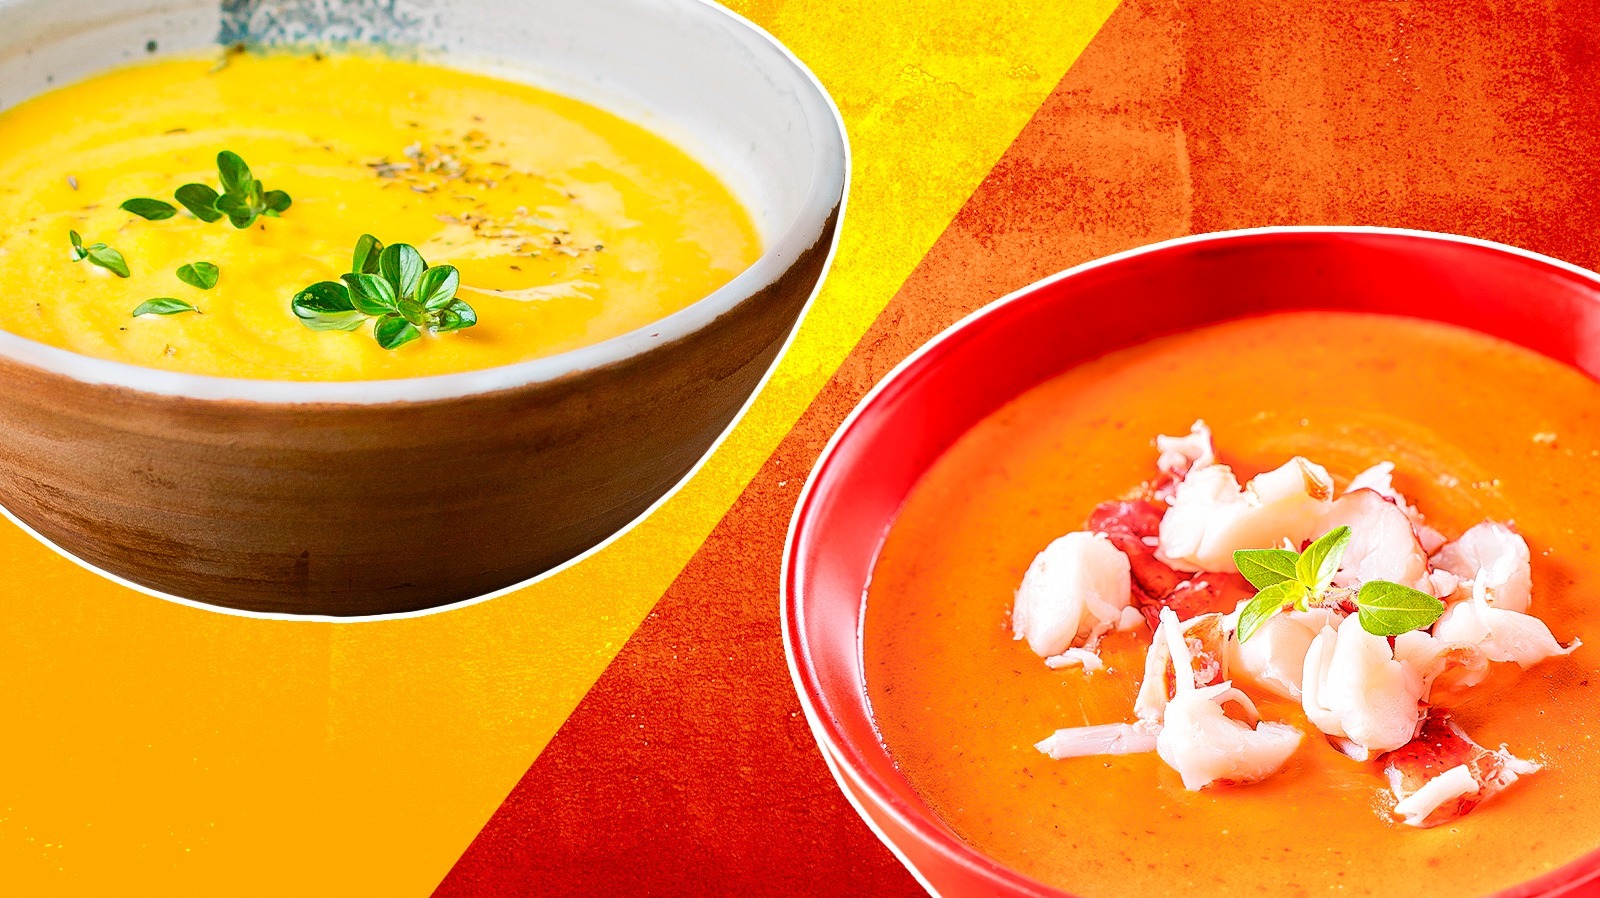 https://www.tastingtable.com/img/gallery/the-main-differences-between-soup-and-bisque/l-intro-1699982851.jpg